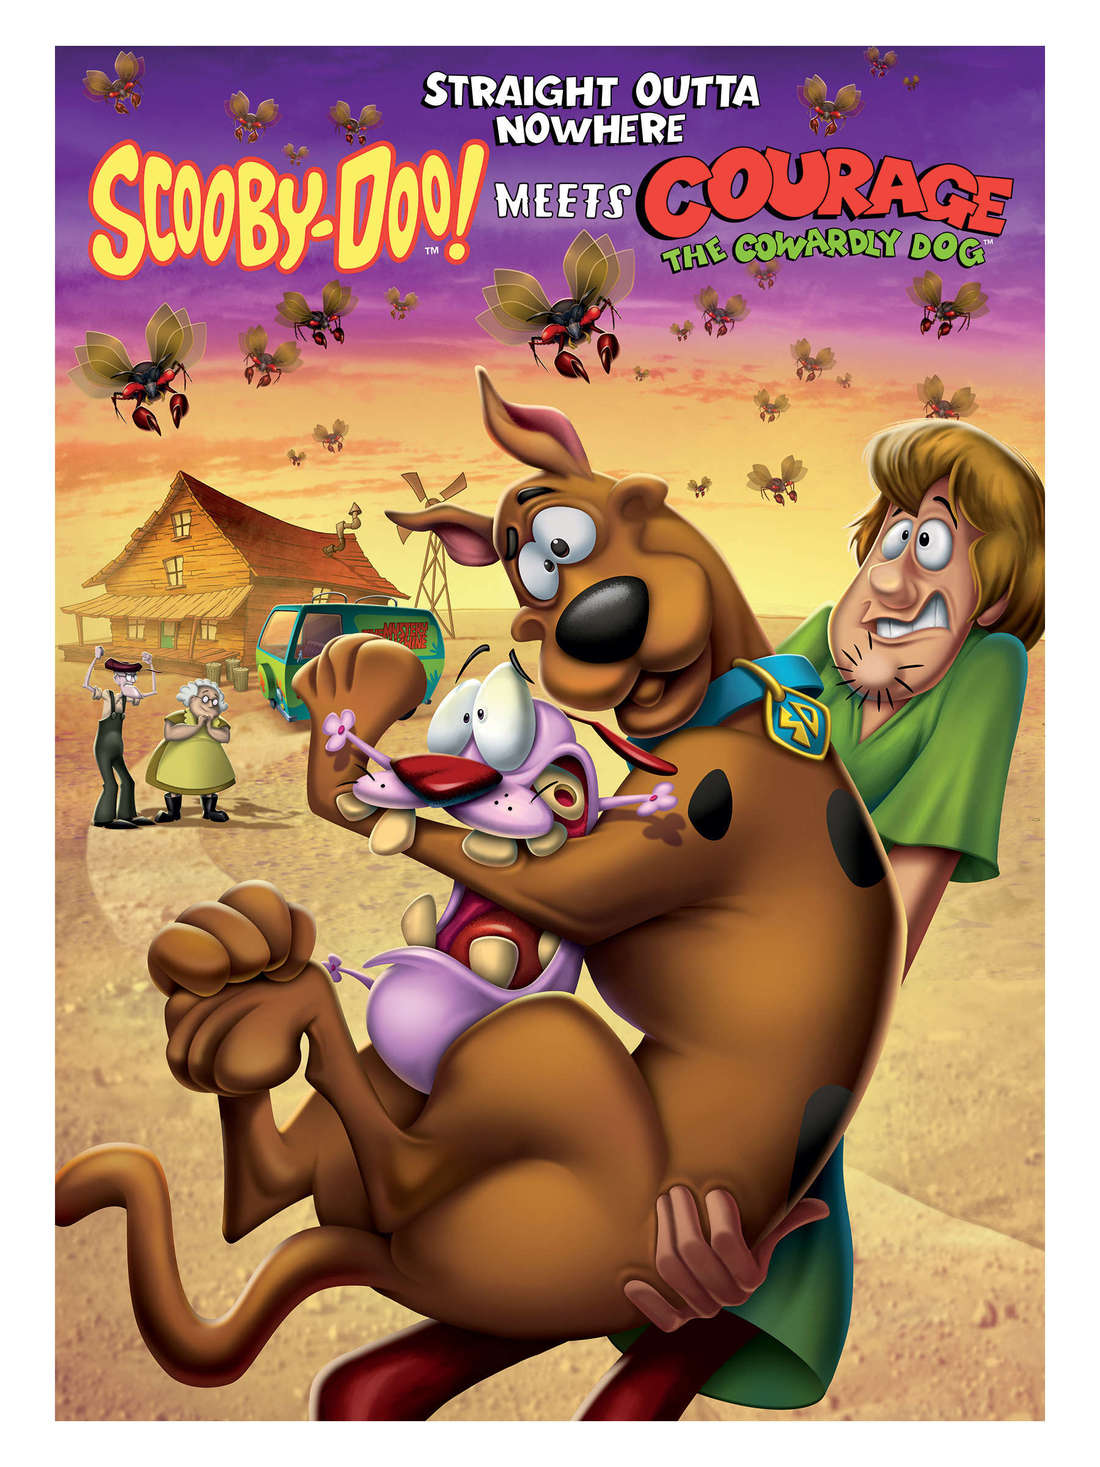 "Scooby-Doo! Meets Courage the Cowardly Dog' Trailer Out: The Epic Crossover Movie Releases on DVD, September 14